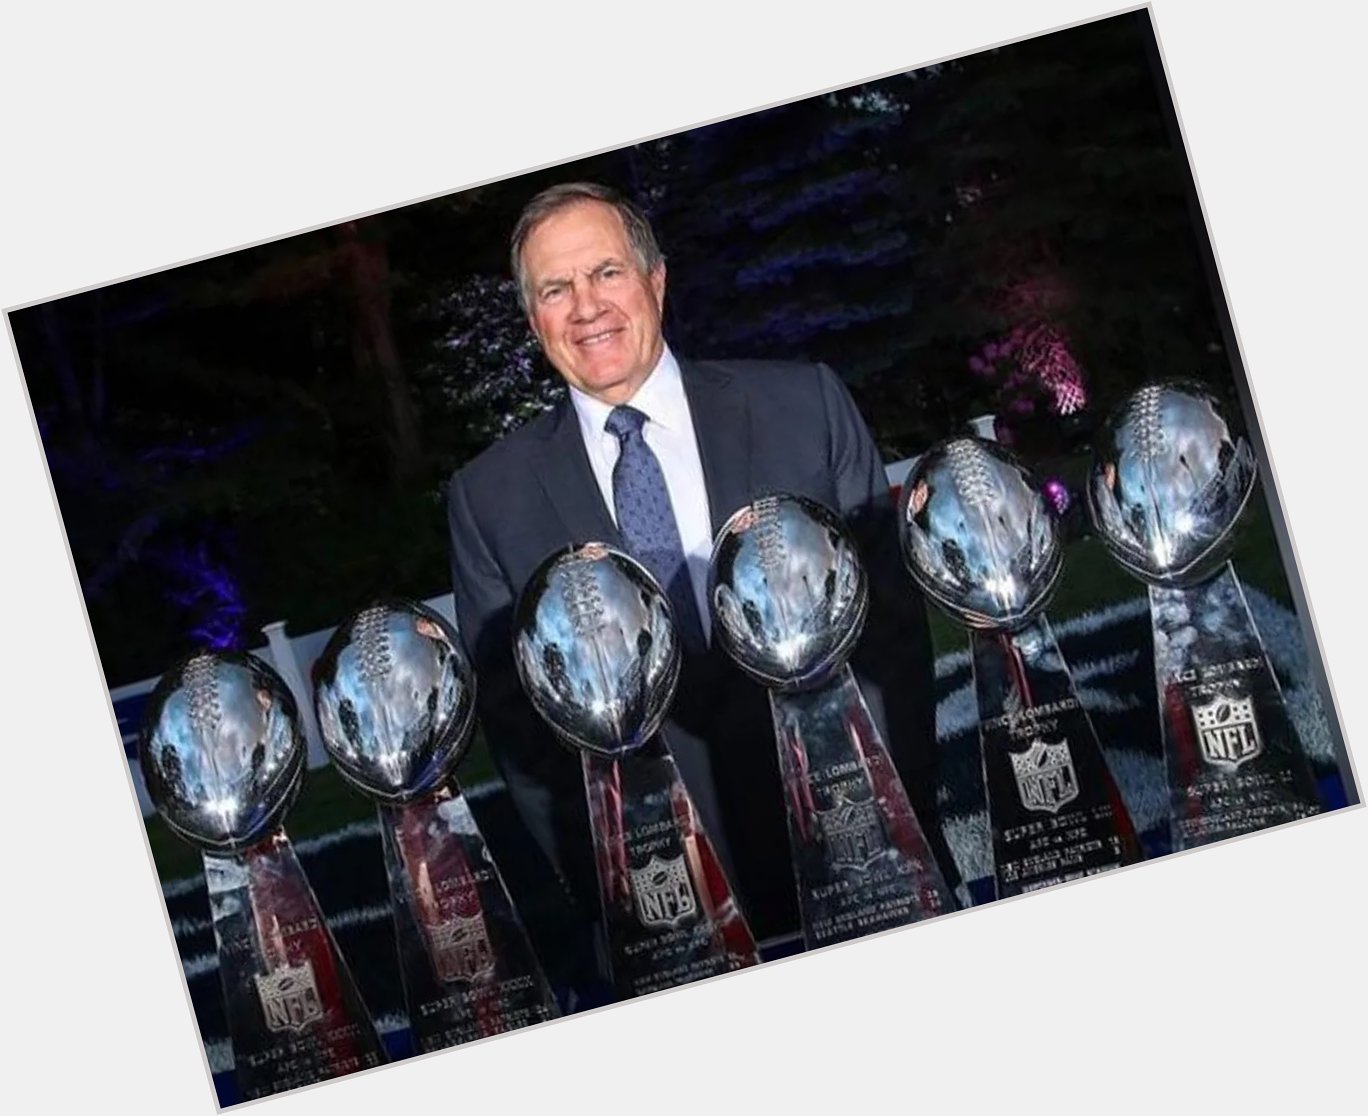 Happy birthday to the greatest coach in football! head coach Bill Belichick is 70 years young today! 